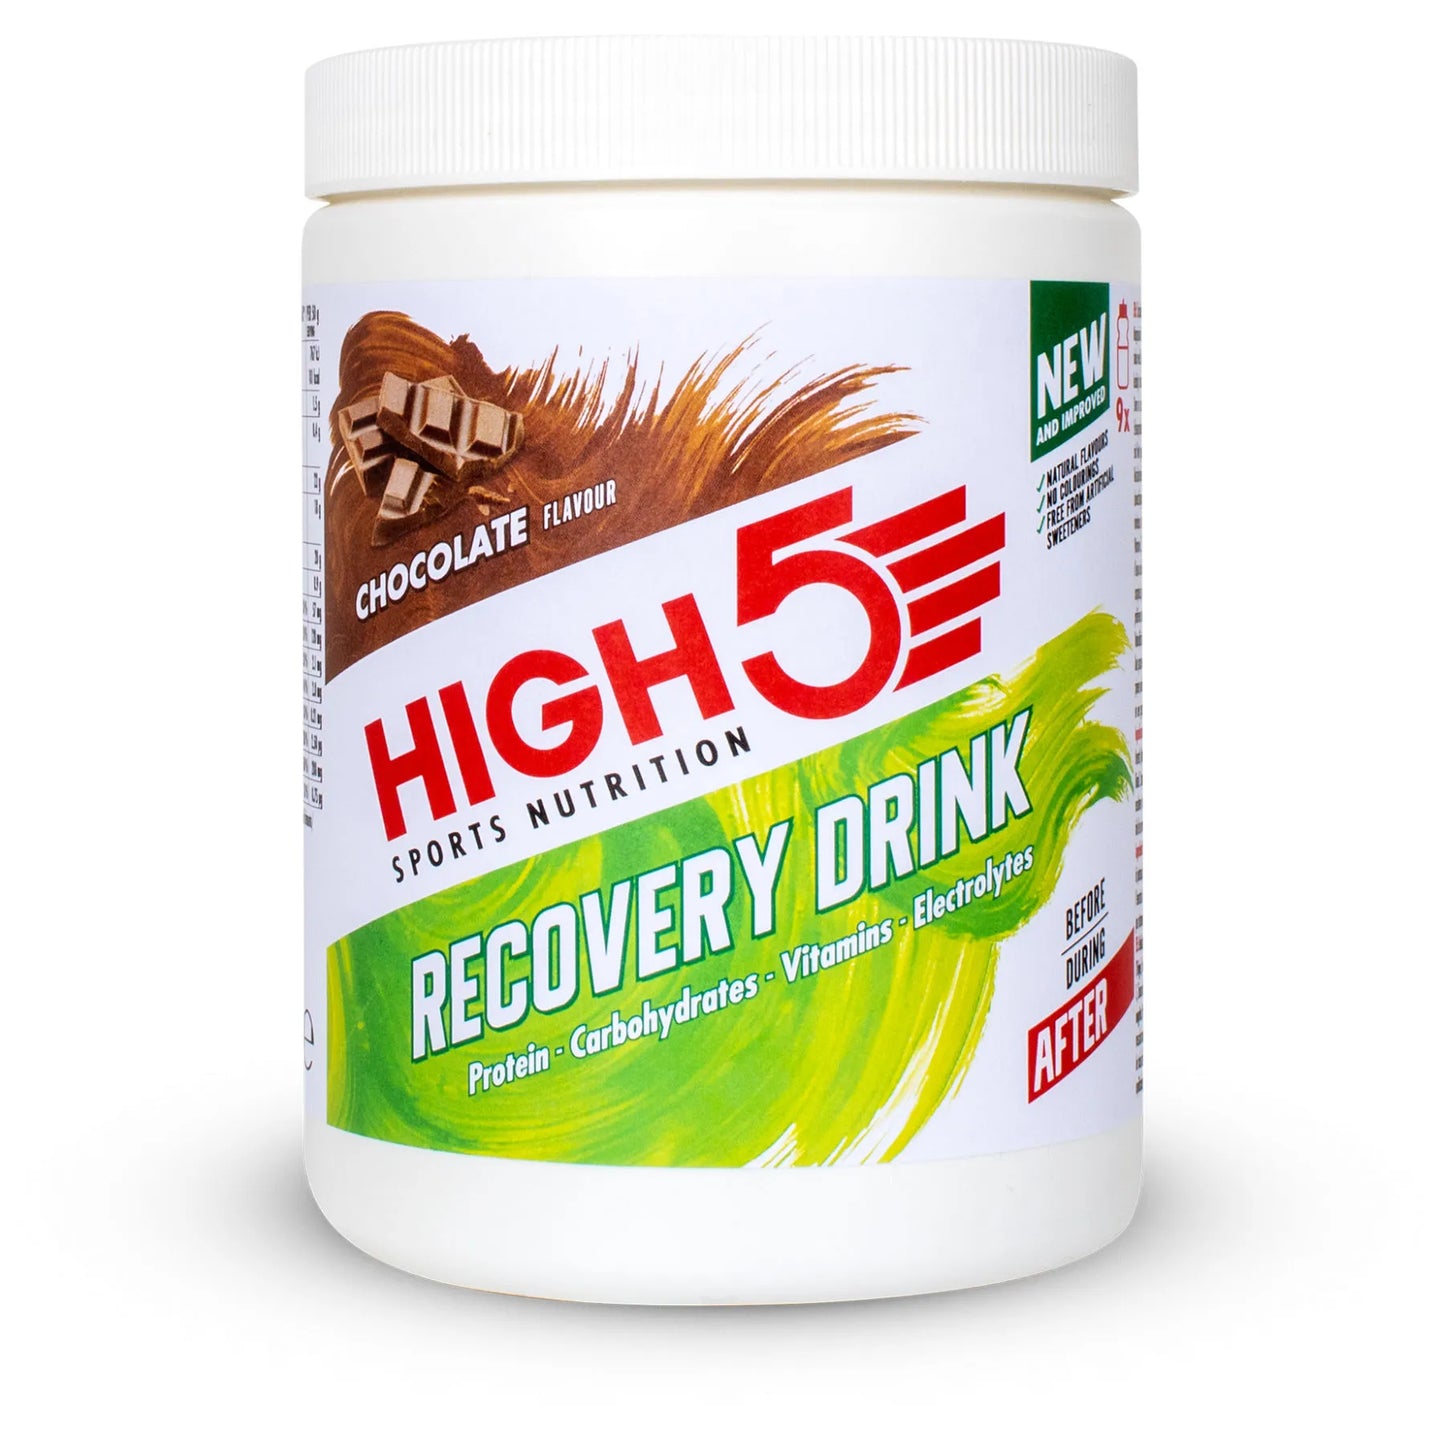 HIgh5 Recovery Drink